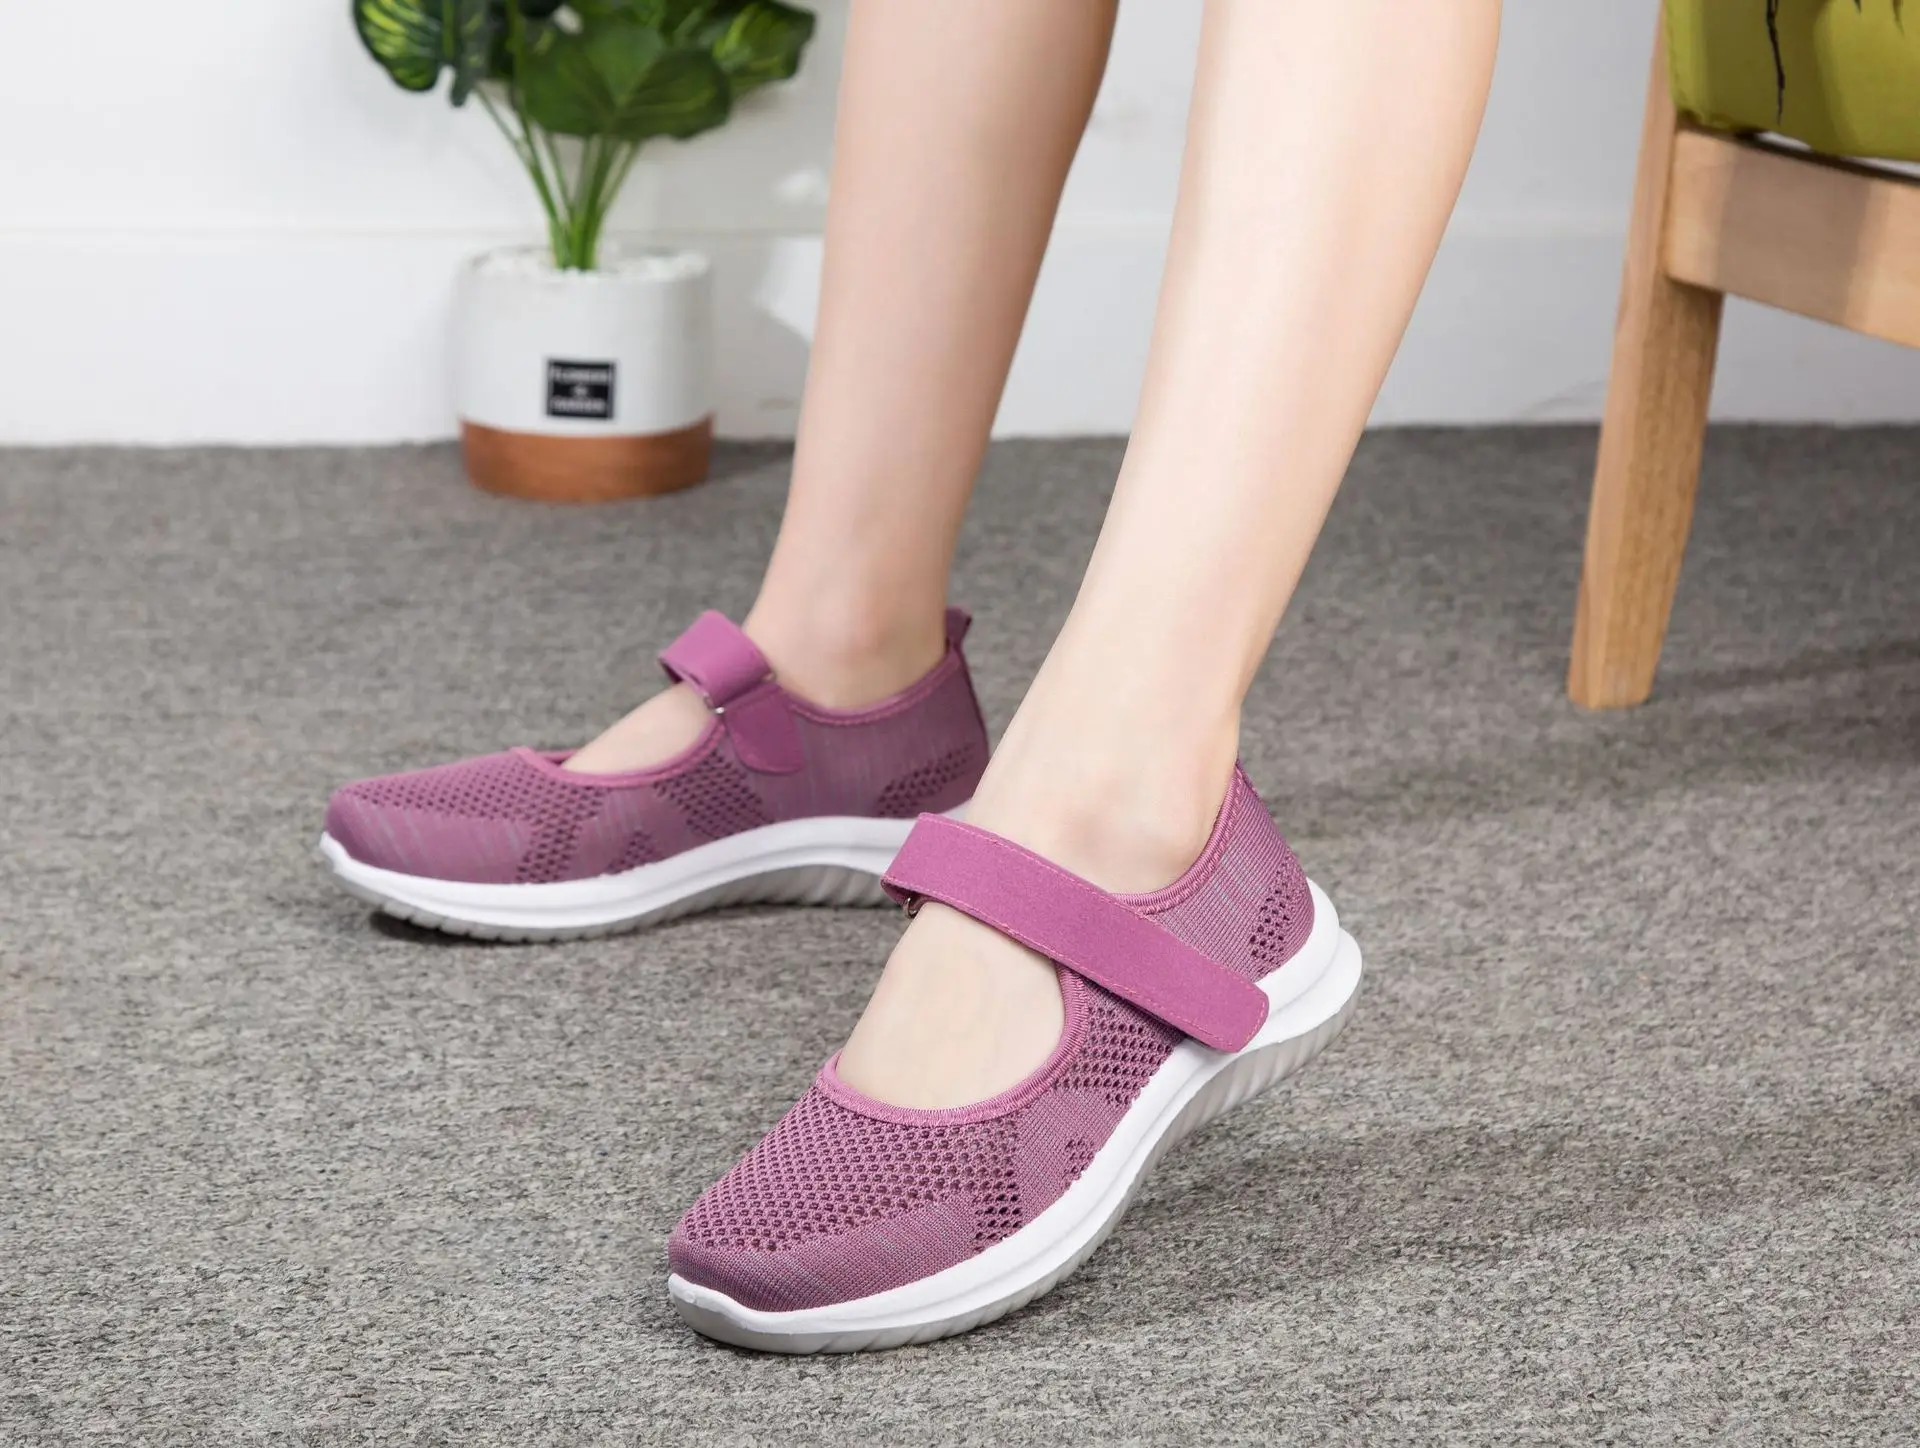 2020 summer new style women's flat shoes women's Mary Jane mesh cloth casual comfortable casual shoes shoes women